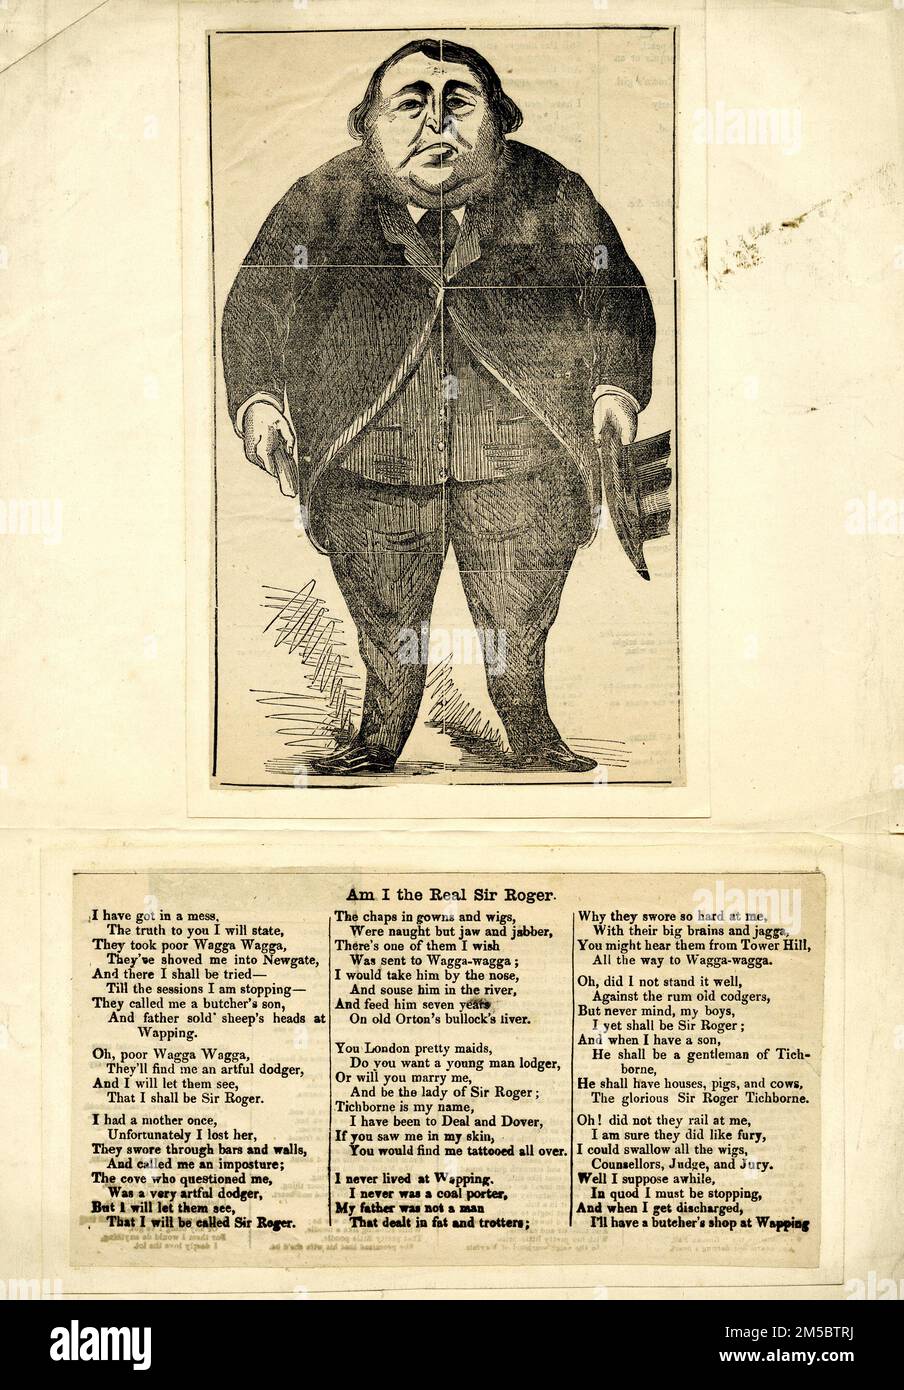 Poem entitled Am I the real Sir Roger and etching portrait related to the Tichborne Claimant case in Australian in the 19th century. Orton, a butcher in Wagga Wagga, Australia, claimed to be Sir Roger Tichborne, who had been presumed lost at sea in 1854. Although Lady Tichborne, some other family members, and associates—over one hundred individuals—accepted him and initially supported his claim, Orton lost an 1871 trial over the Tichborne inheritance. He was then arrested on a charge of perjury, and, after a second trial, was convicted in 1874 and served ten years in prison. He died, impoveris Stock Photo